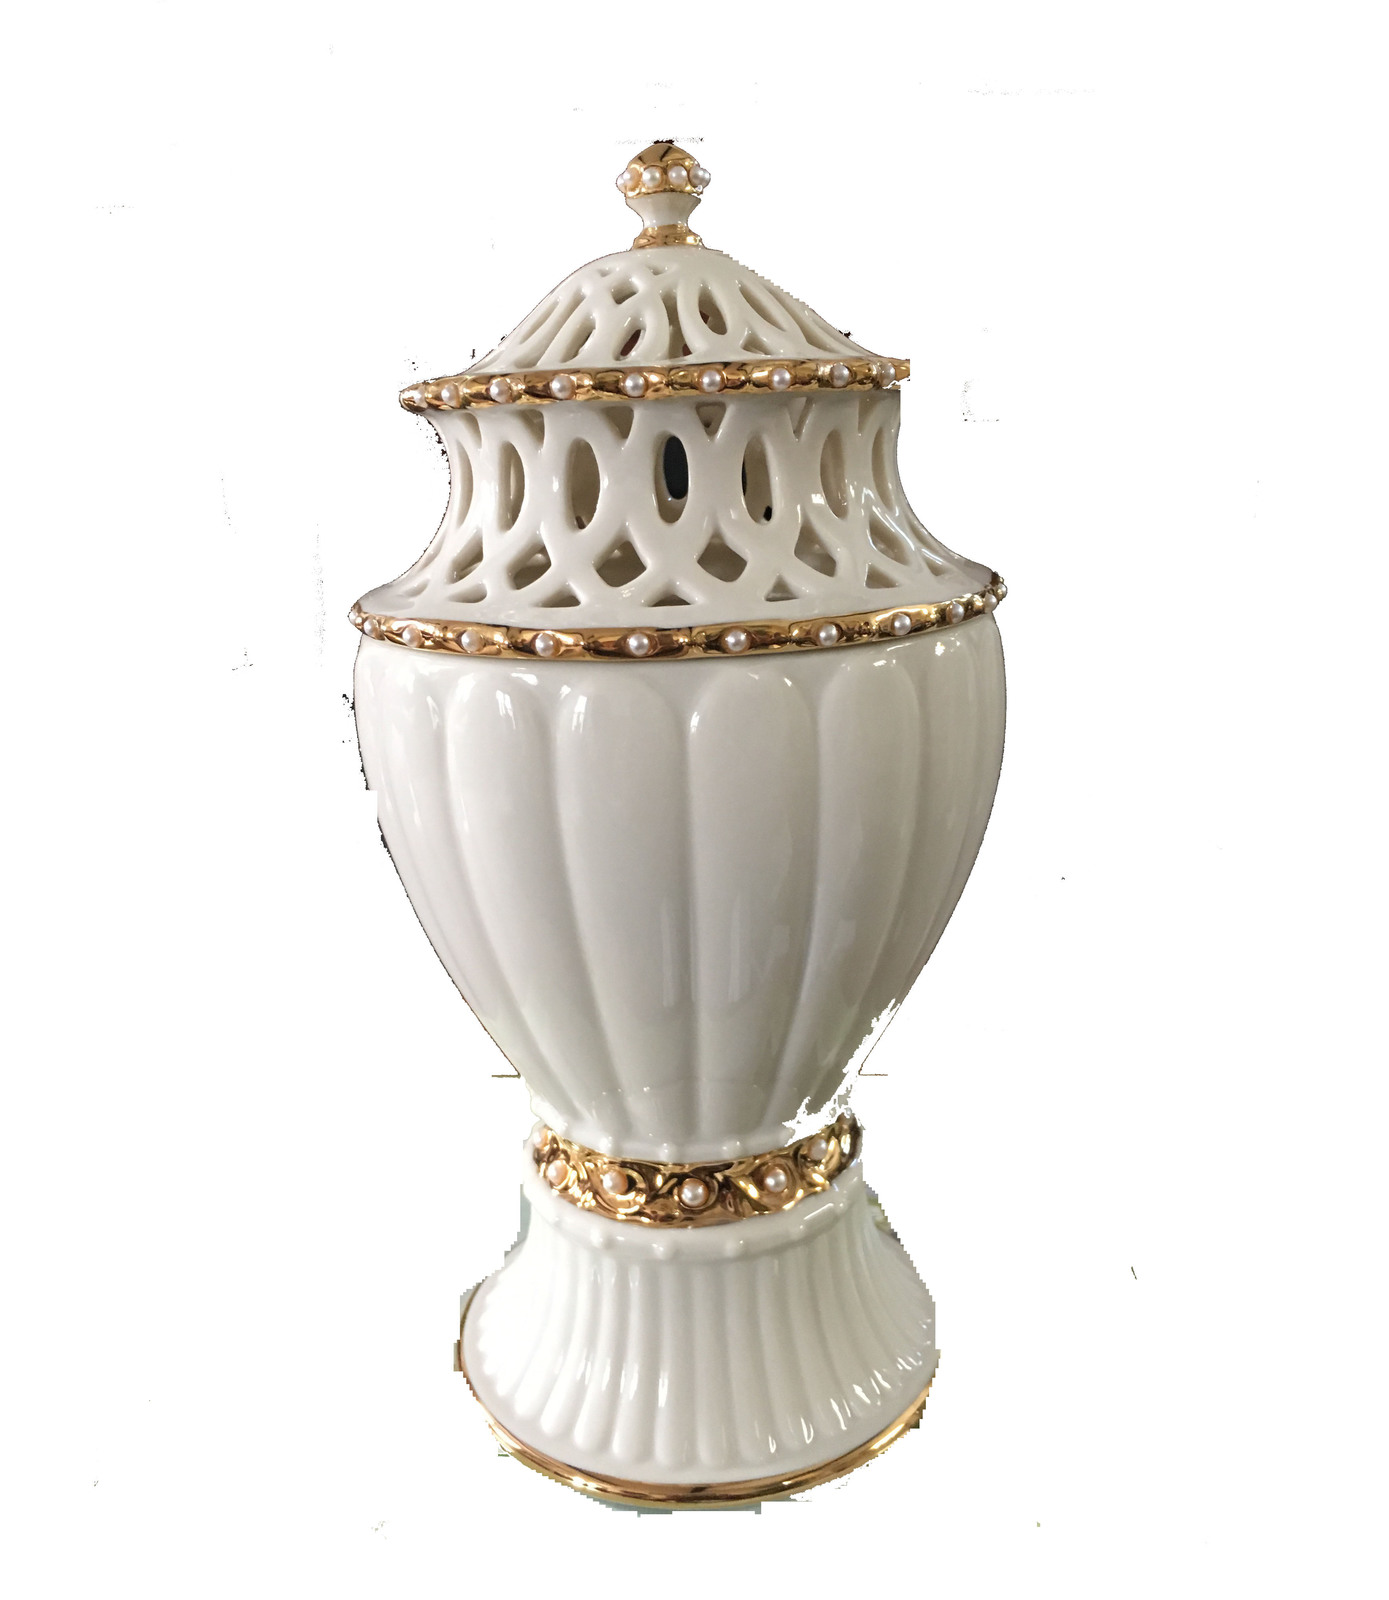 DECORATIVE CERAMIC VASE BY LENOX GOLD PLATED LINED AROUND  - $28.75